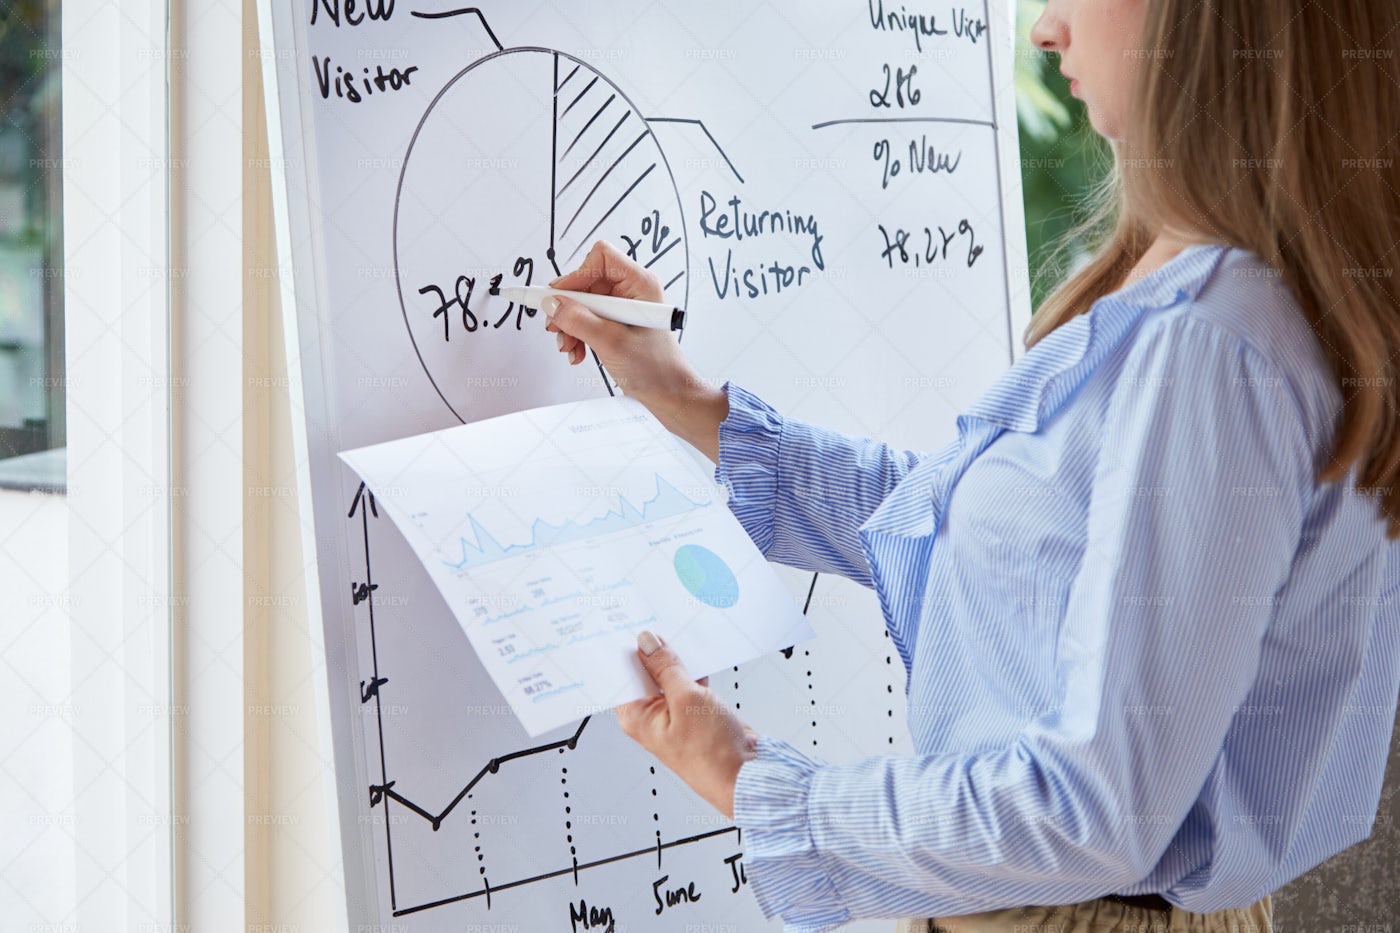 Businesswoman Copying Diagram From...: Stock Photos